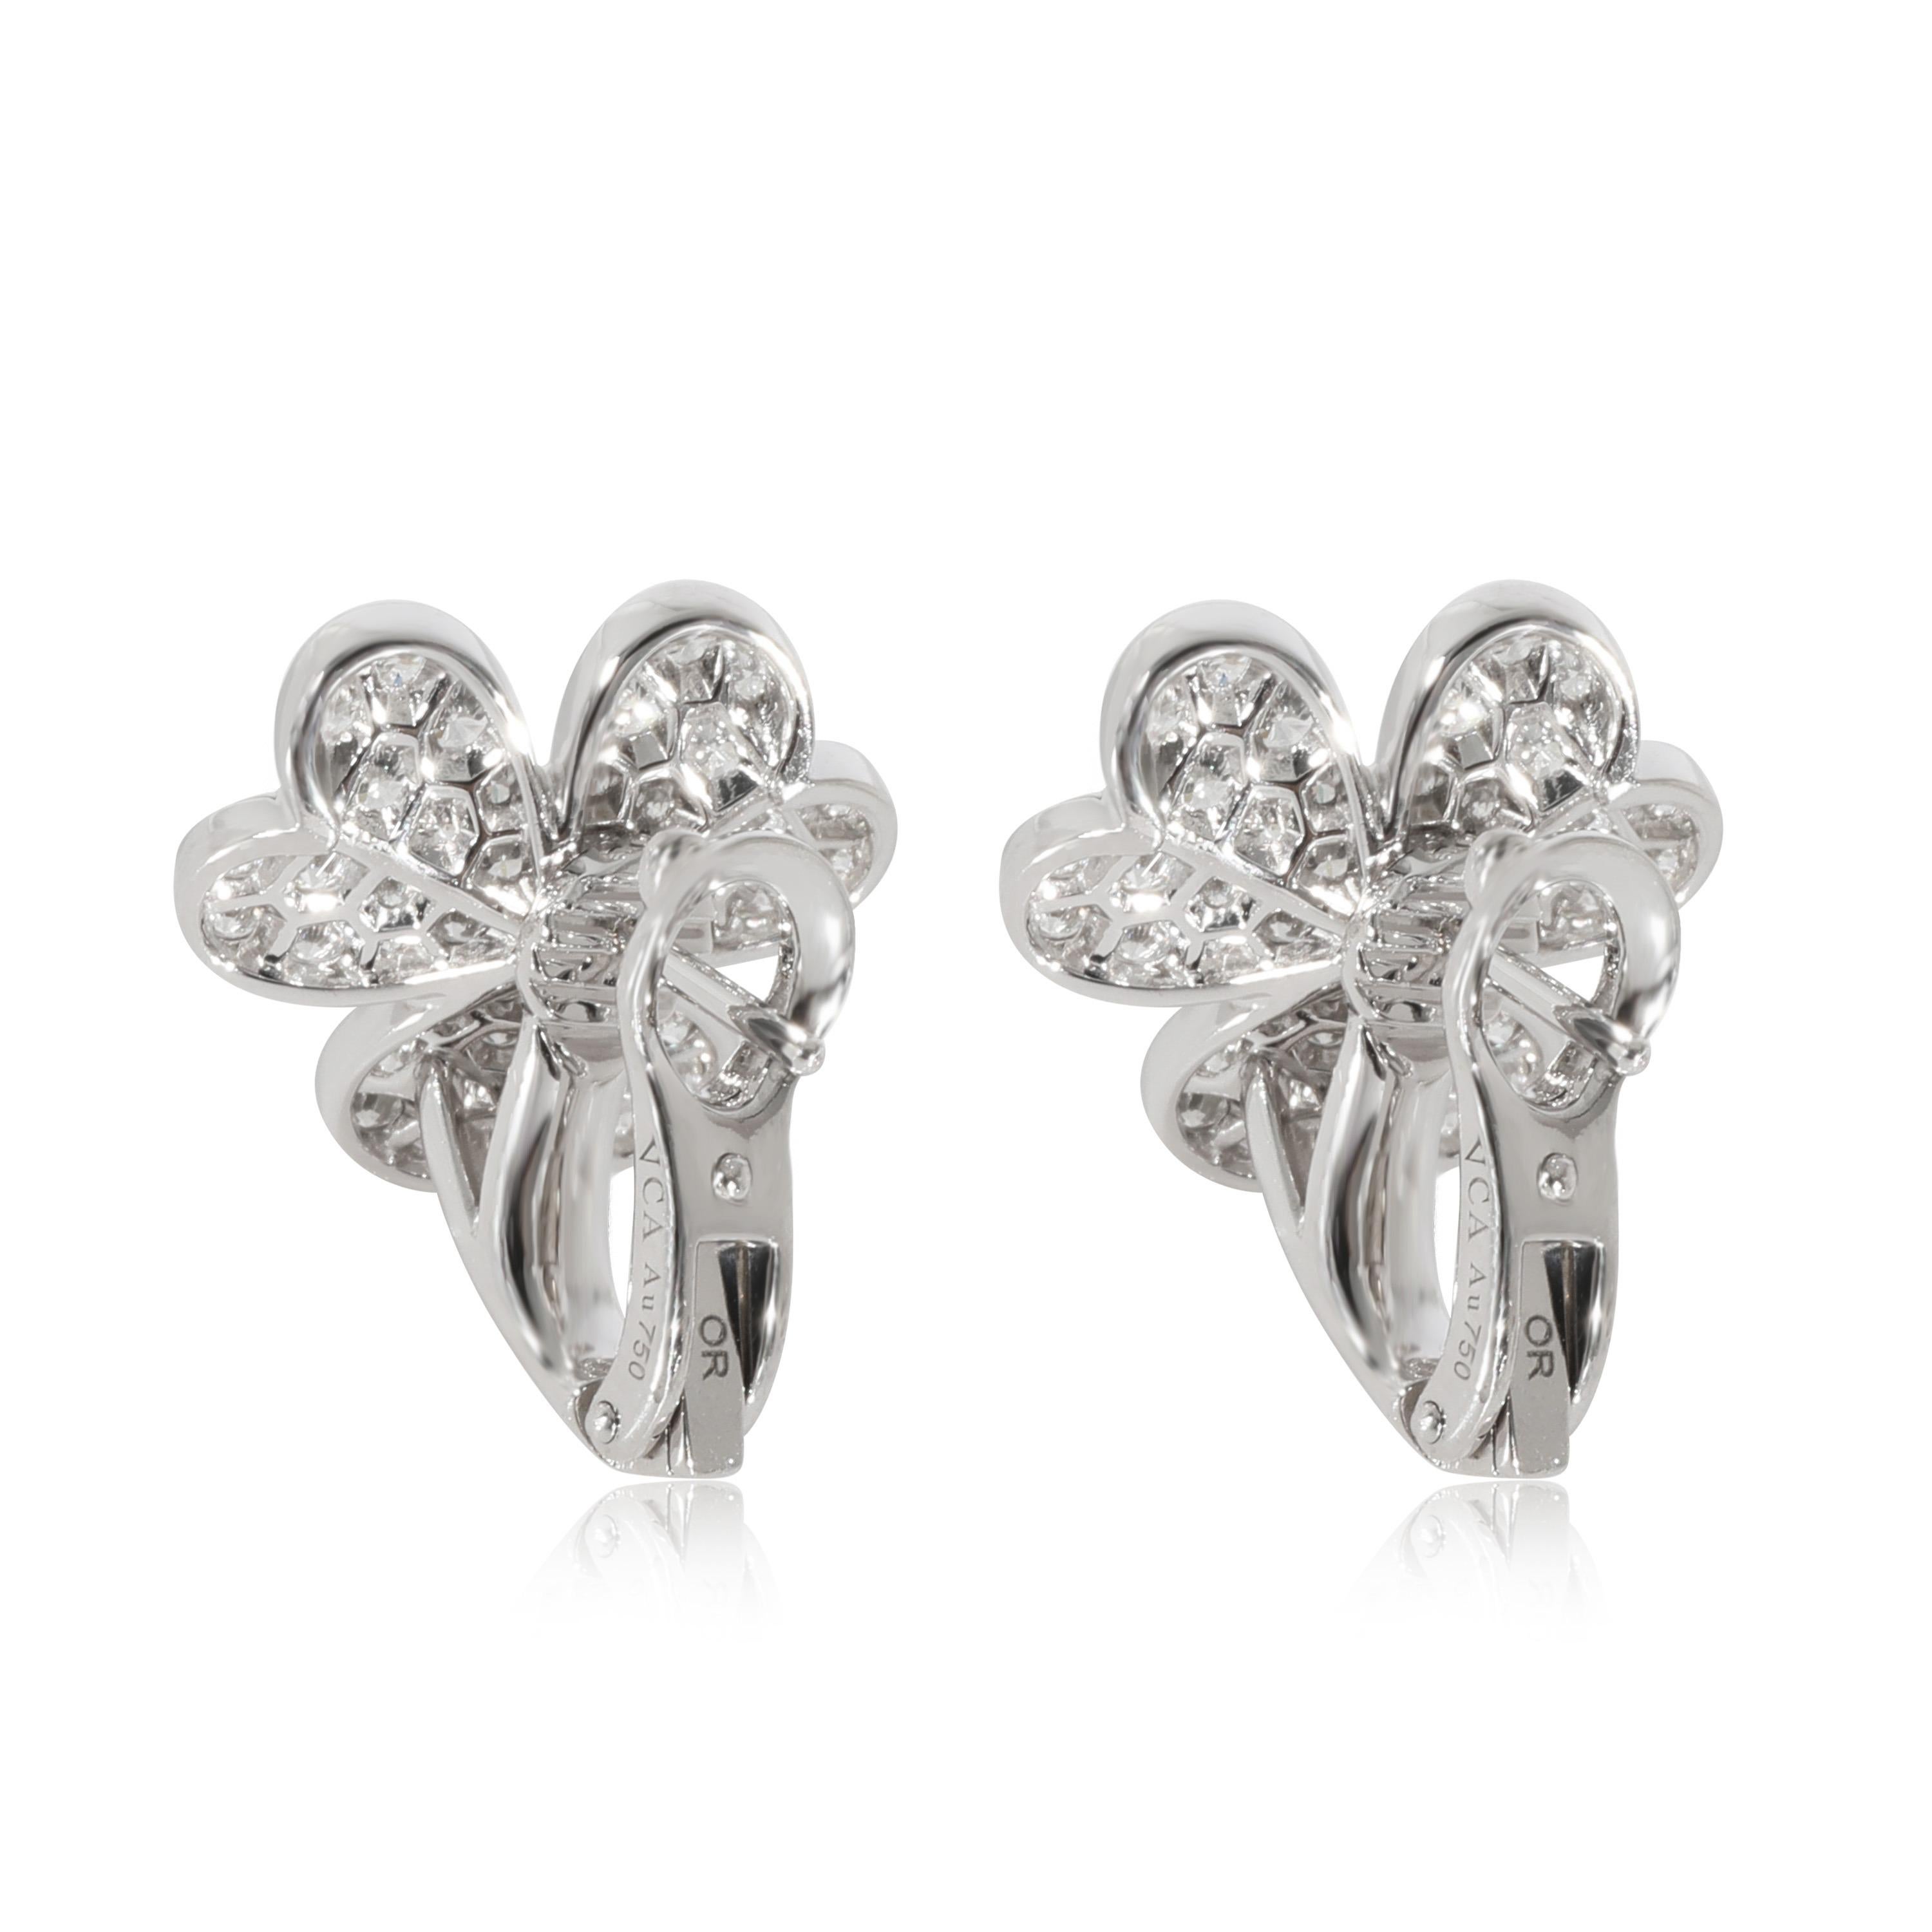 Van Cleef & Arpels Frivole Earrings in 18K White Gold Small Model, 1.61 CTW

PRIMARY DETAILS
SKU: 129443
Listing Title: Van Cleef & Arpels Frivole Earrings in 18K White Gold Small Model, 1.61 CTW
Condition Description: The Frivole collection from